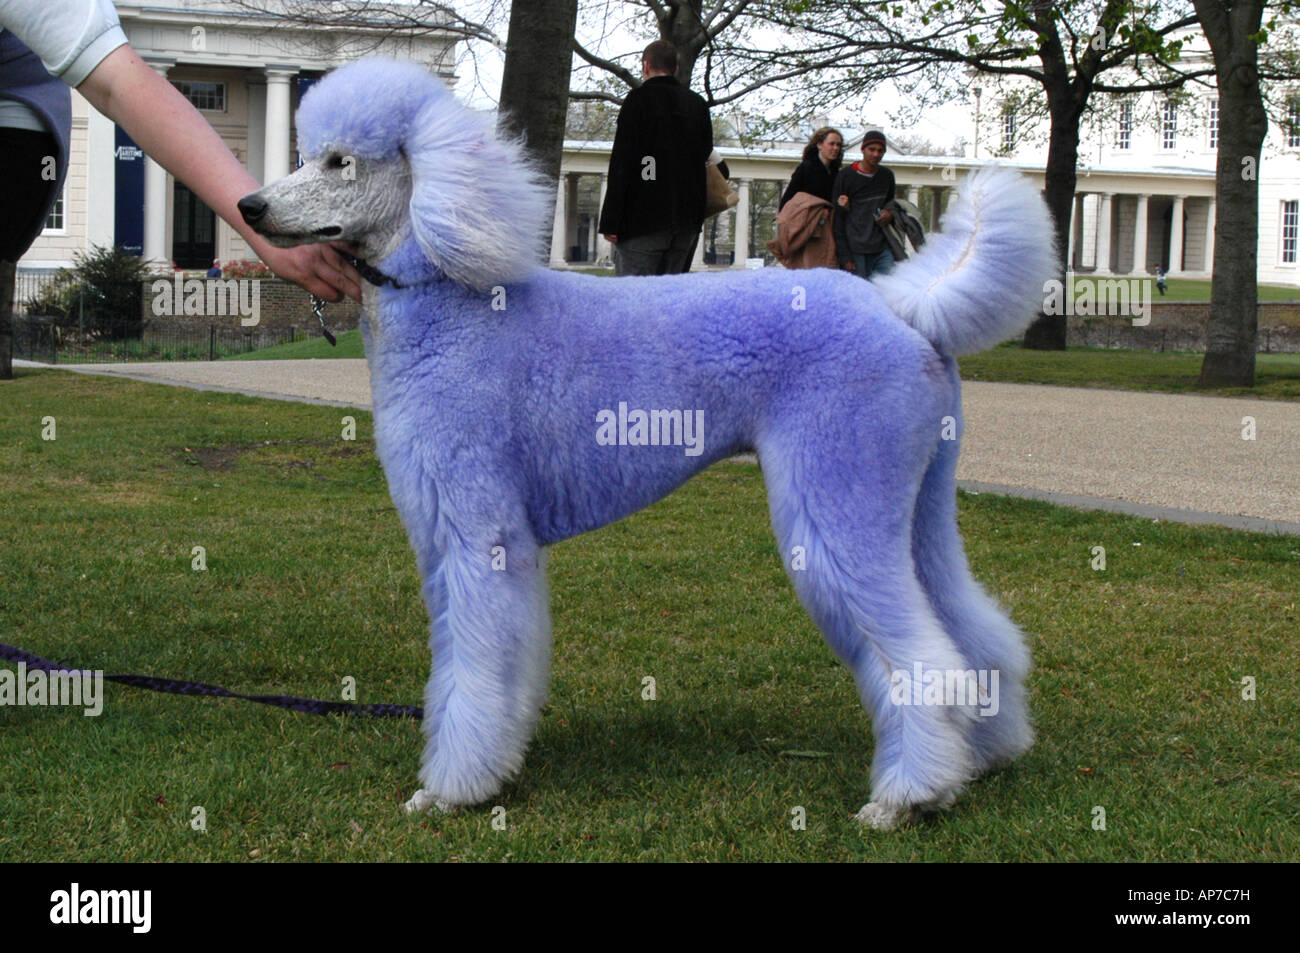 Blue Poodle High Resolution Stock Photography and Images - Alamy